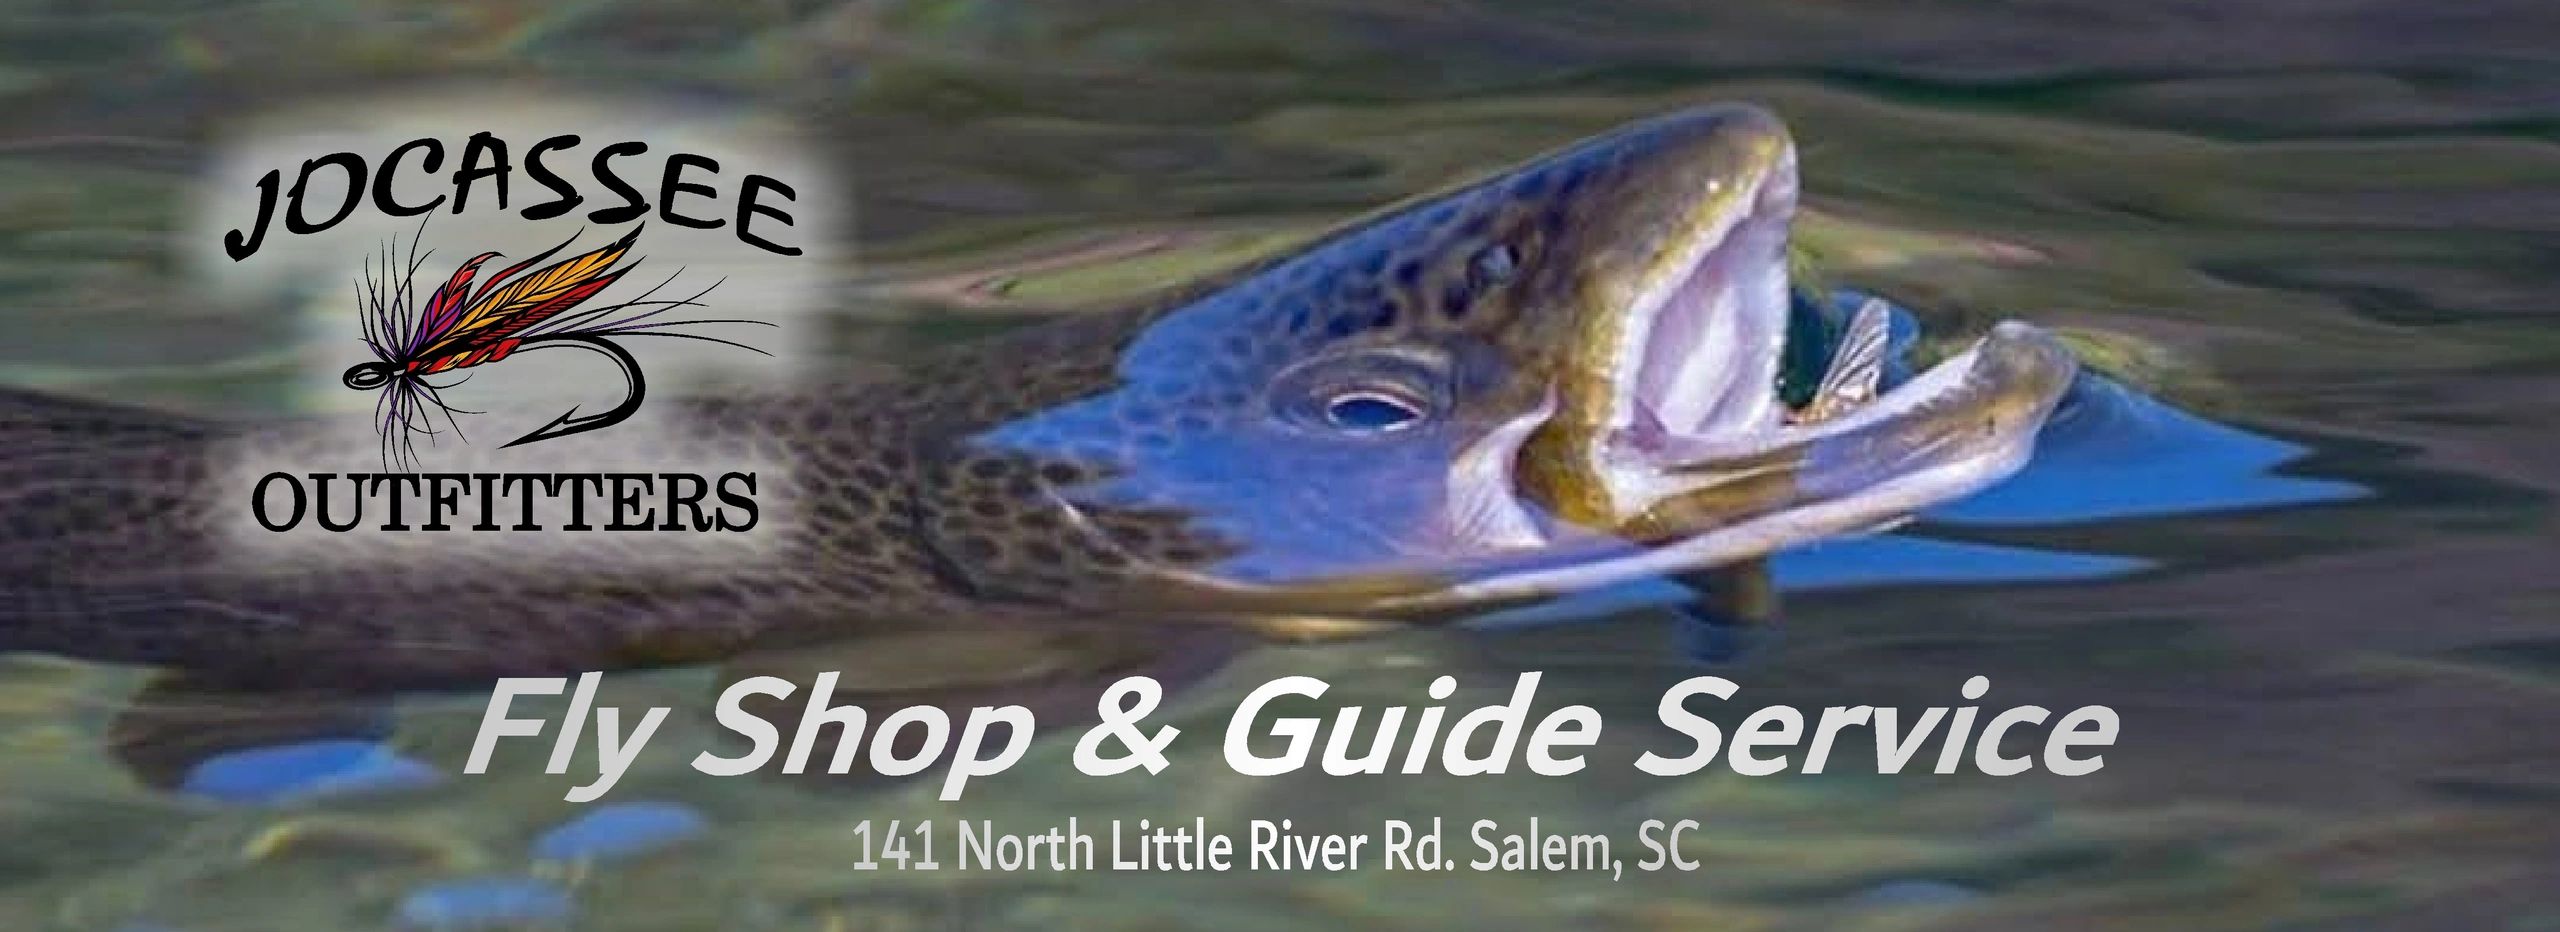 Jocassee Outfitters Fly Shop - Fly Shop & Guide Service, Fly Fishing